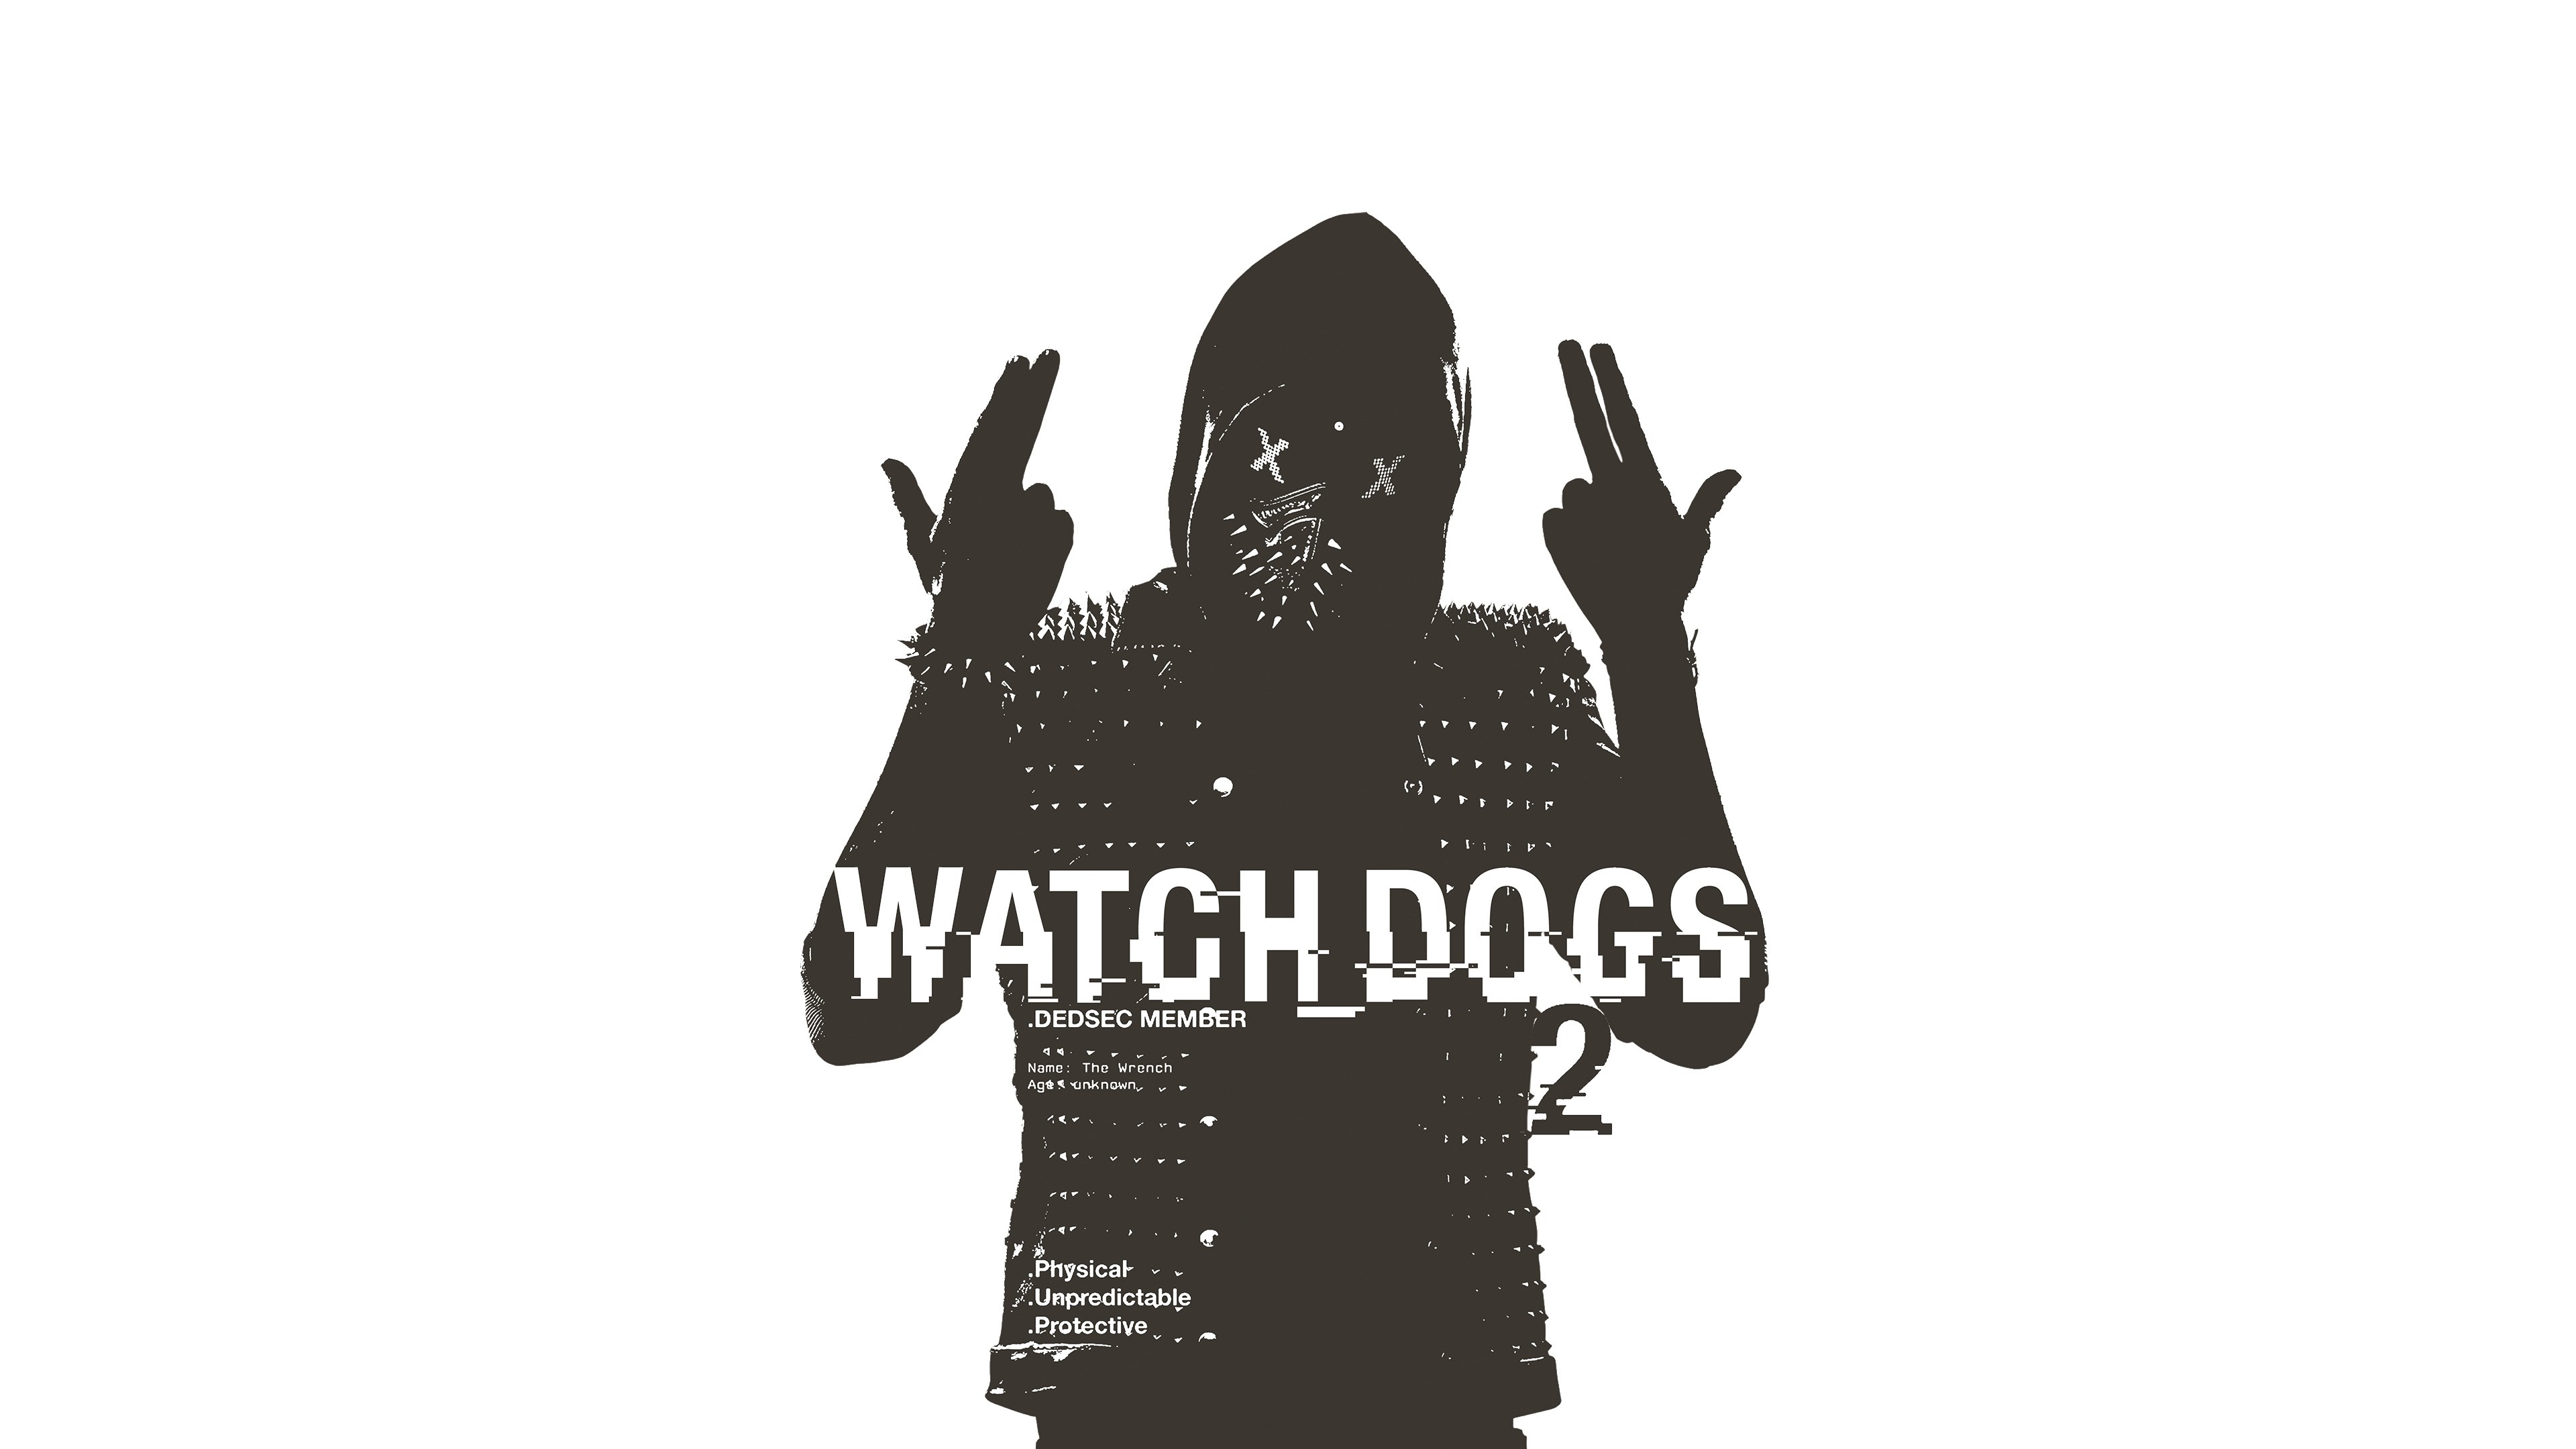 Watch Dogs, Ubisoft, Watch Dogs 2 Wallpapers HD / Desktop and Mobile Backgrounds